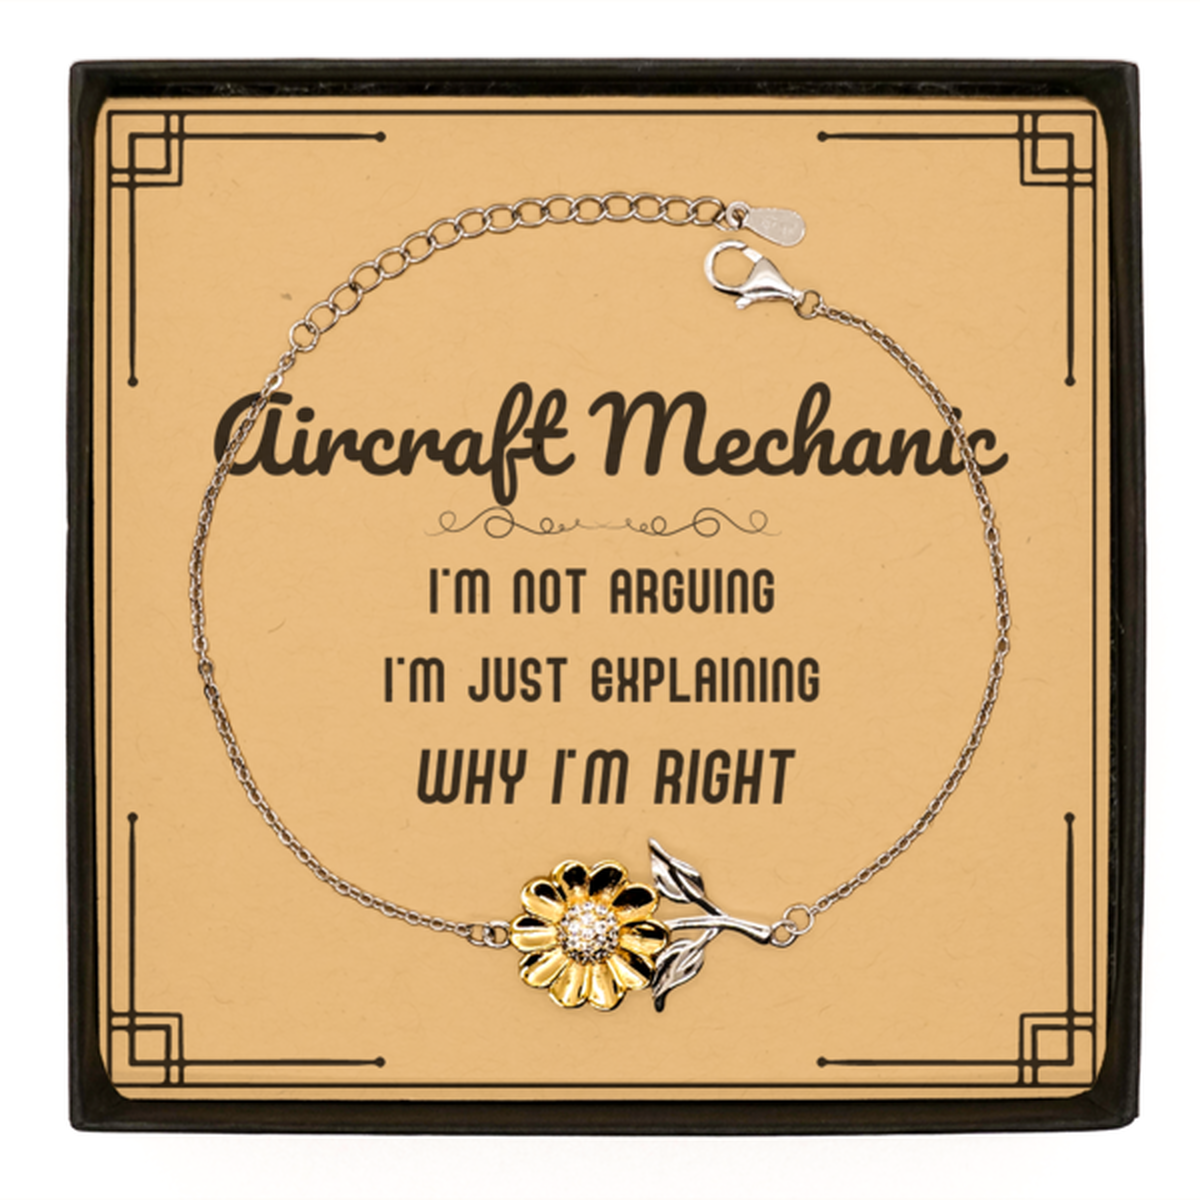 Aircraft Mechanic I'm not Arguing. I'm Just Explaining Why I'm RIGHT Sunflower Bracelet, Funny Saying Quote Aircraft Mechanic Gifts For Aircraft Mechanic Message Card Graduation Birthday Christmas Gifts for Men Women Coworker